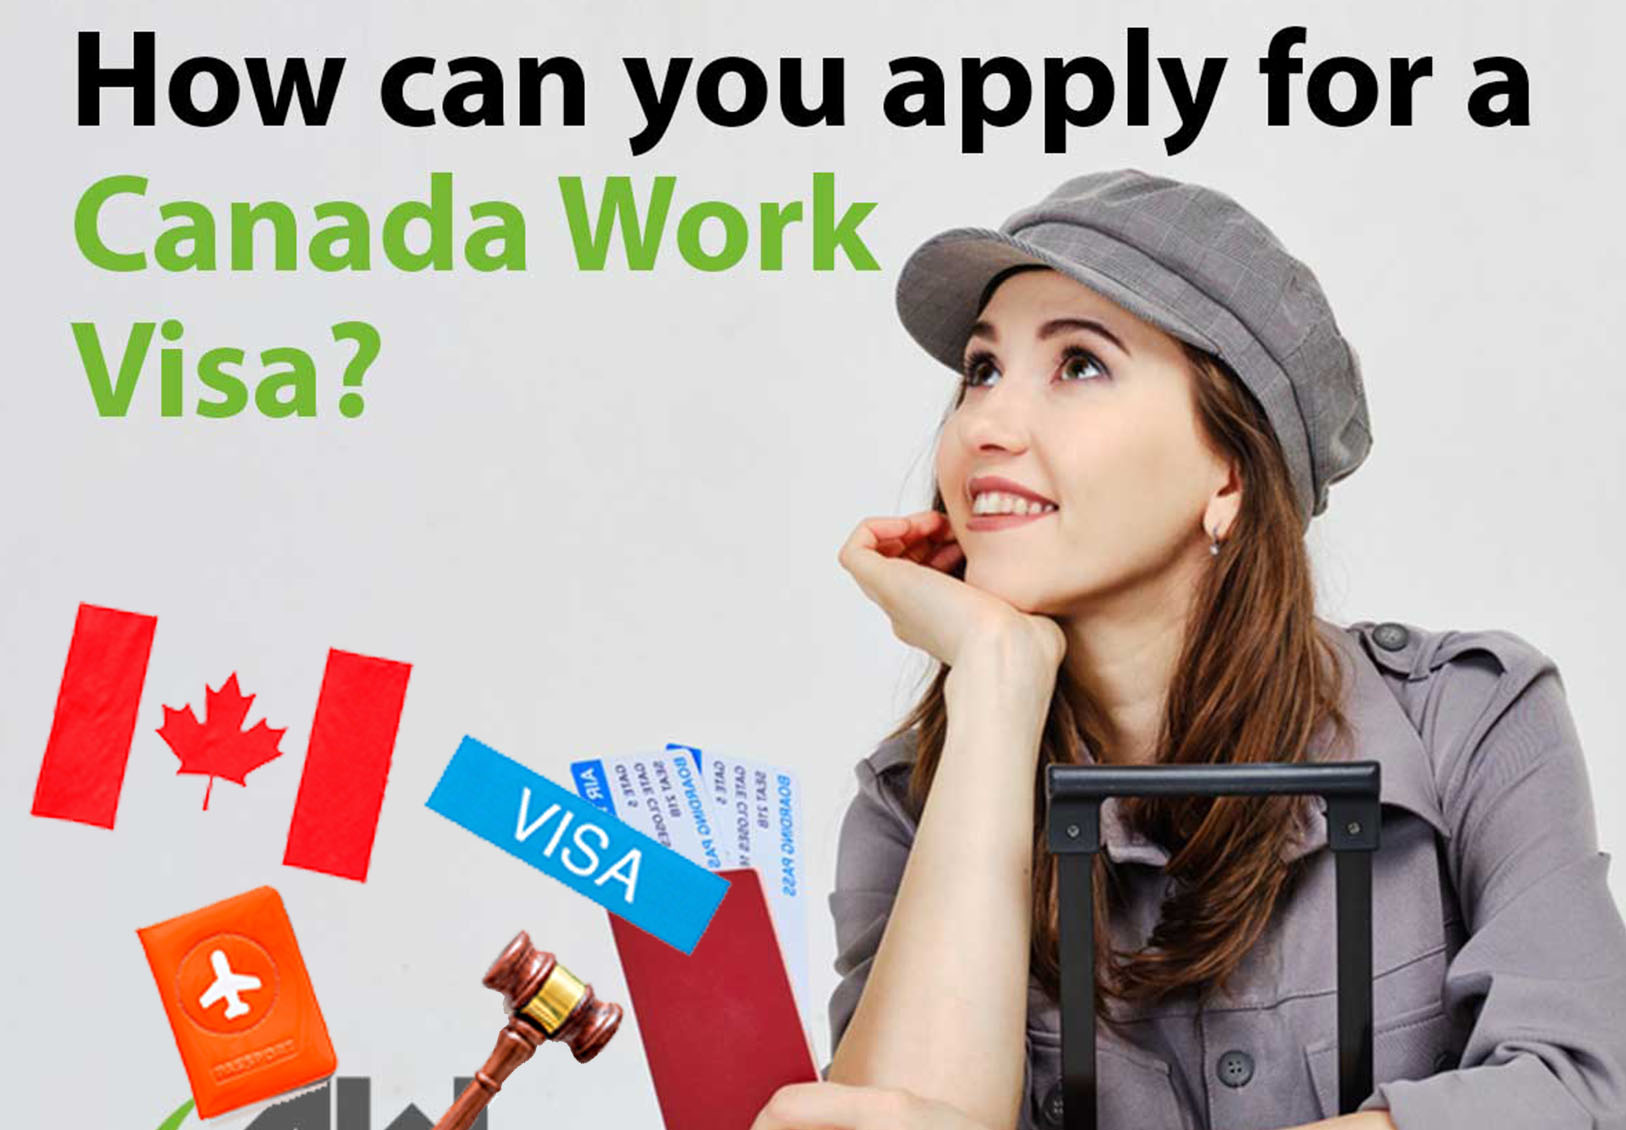 How to Get a Canadian Work Visa – Apply Now for Canada Work Permit at www.canada.ca